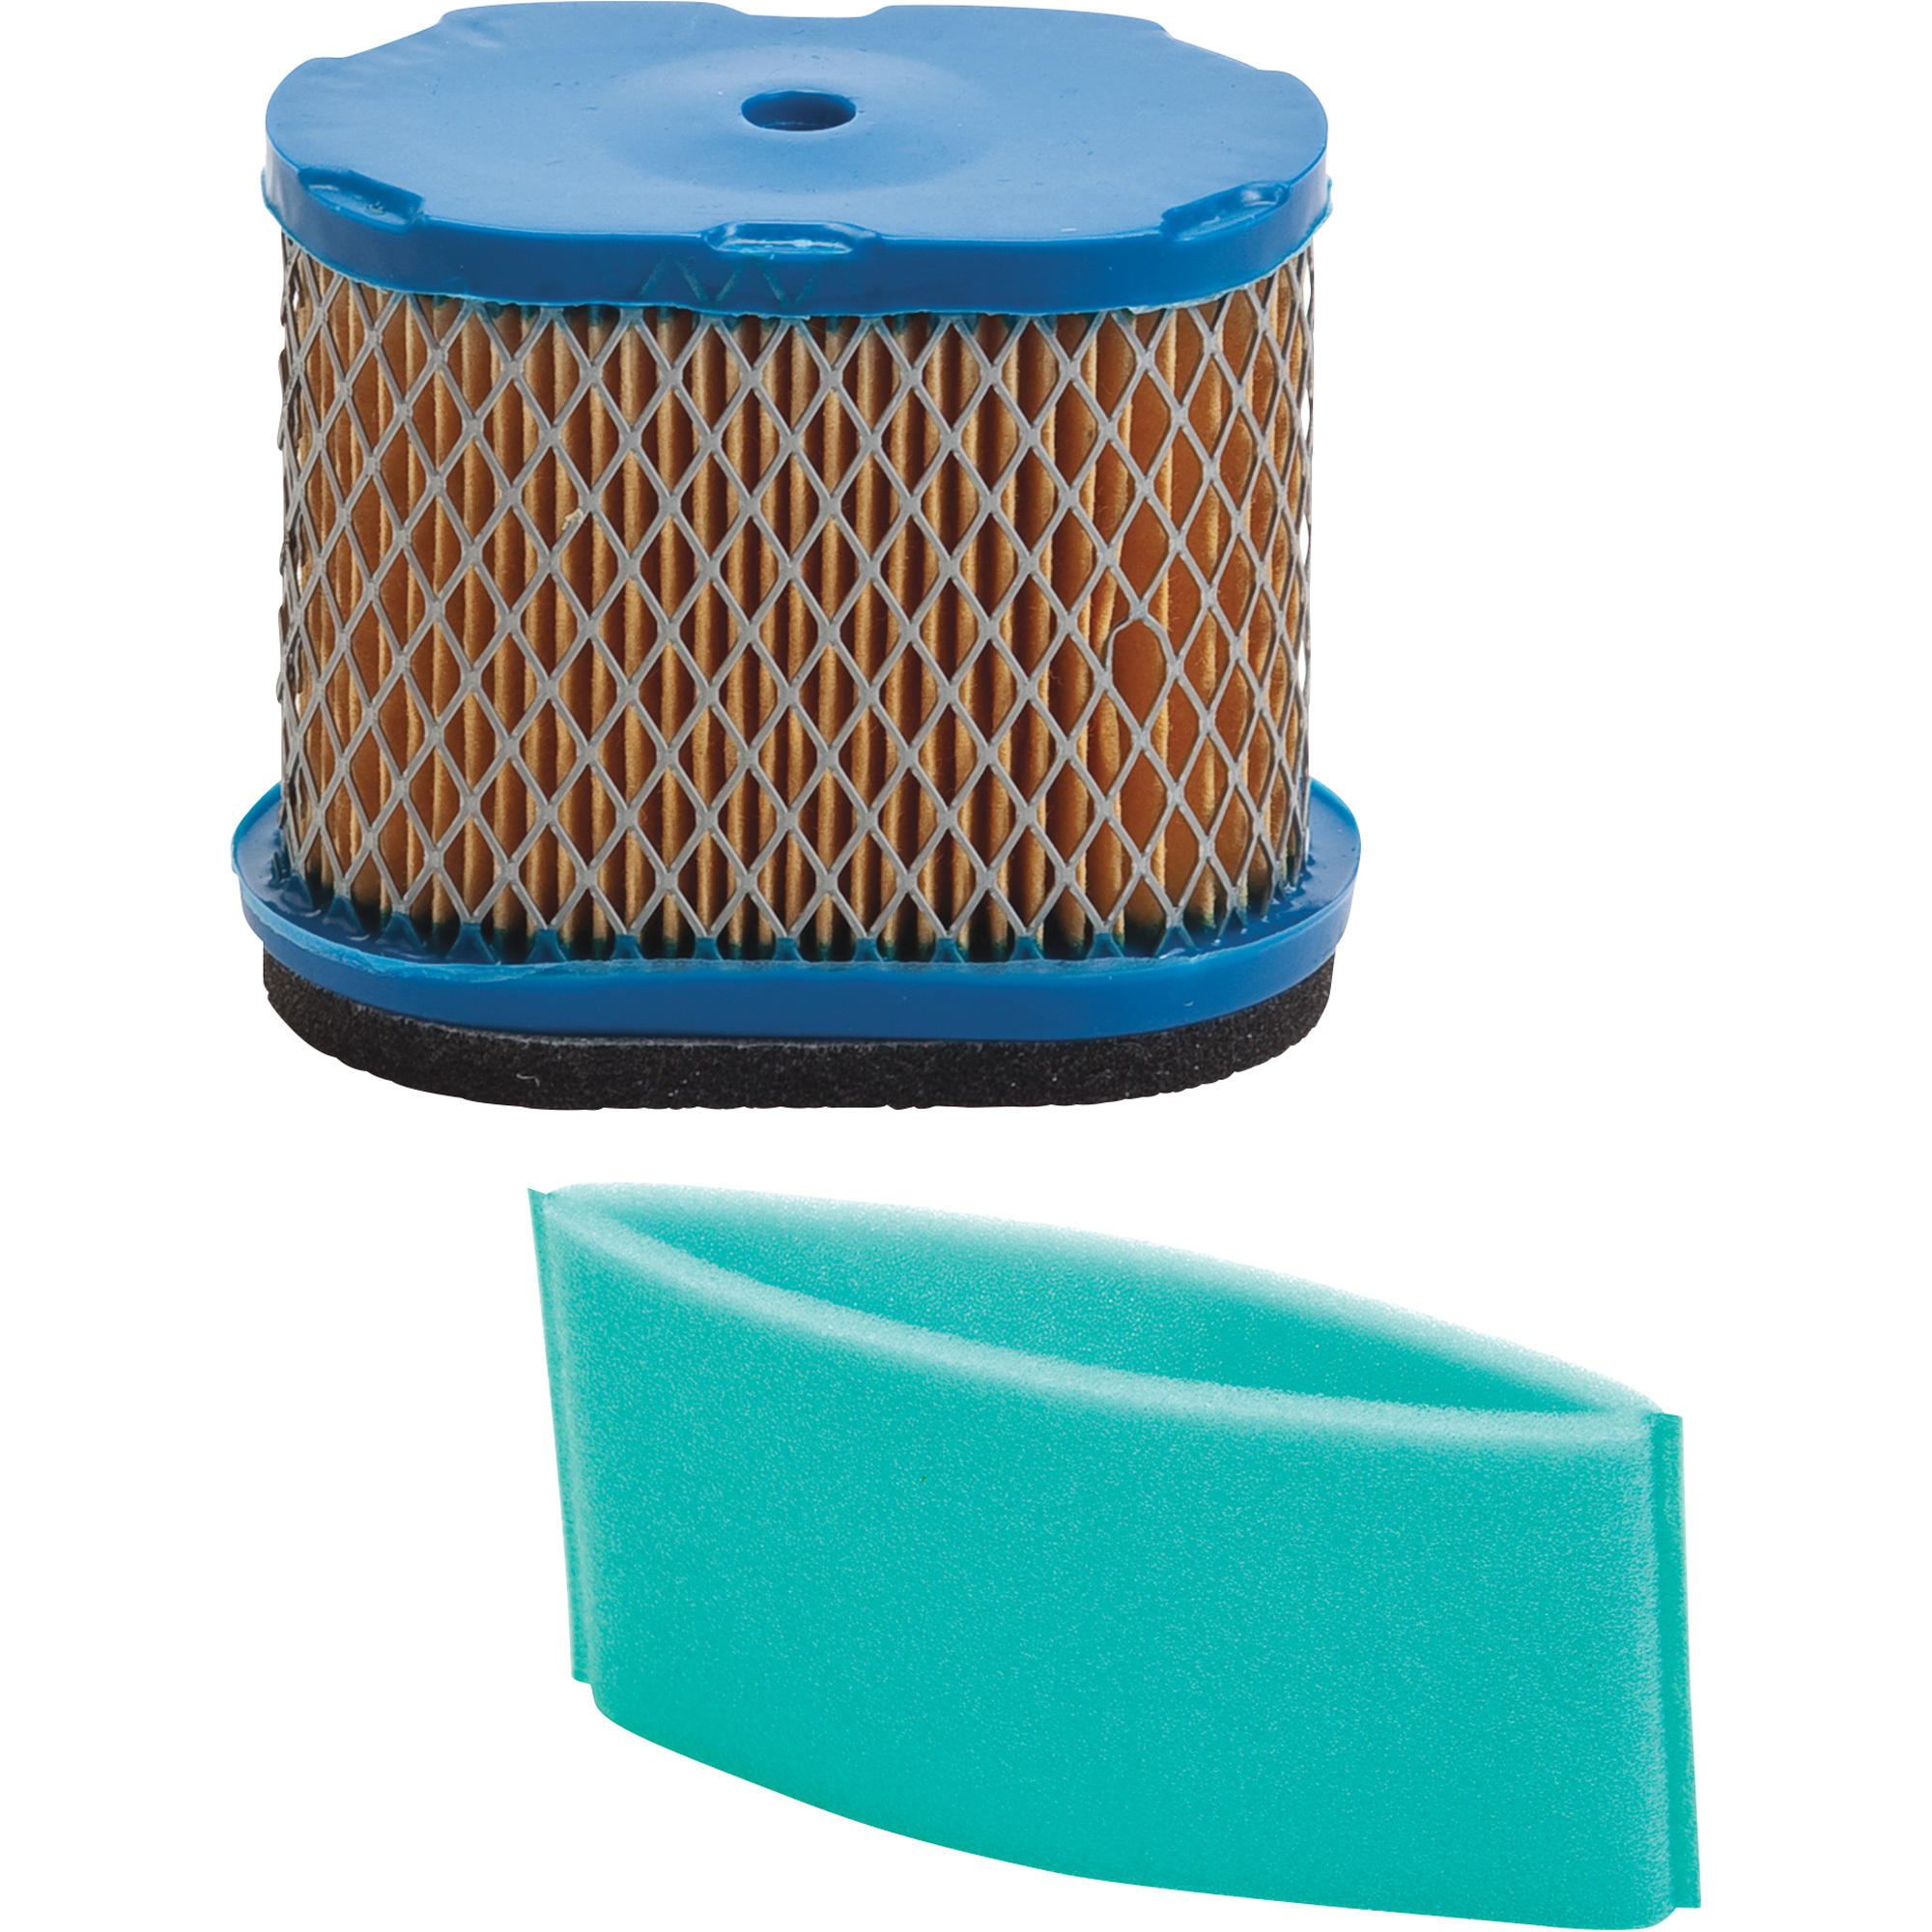 Oregon Air Filter and Pre-Cleaner Kit, Replacement for Briggs & Stratton OEM Part#s 697029 and 273356S, Model 30-033CSK